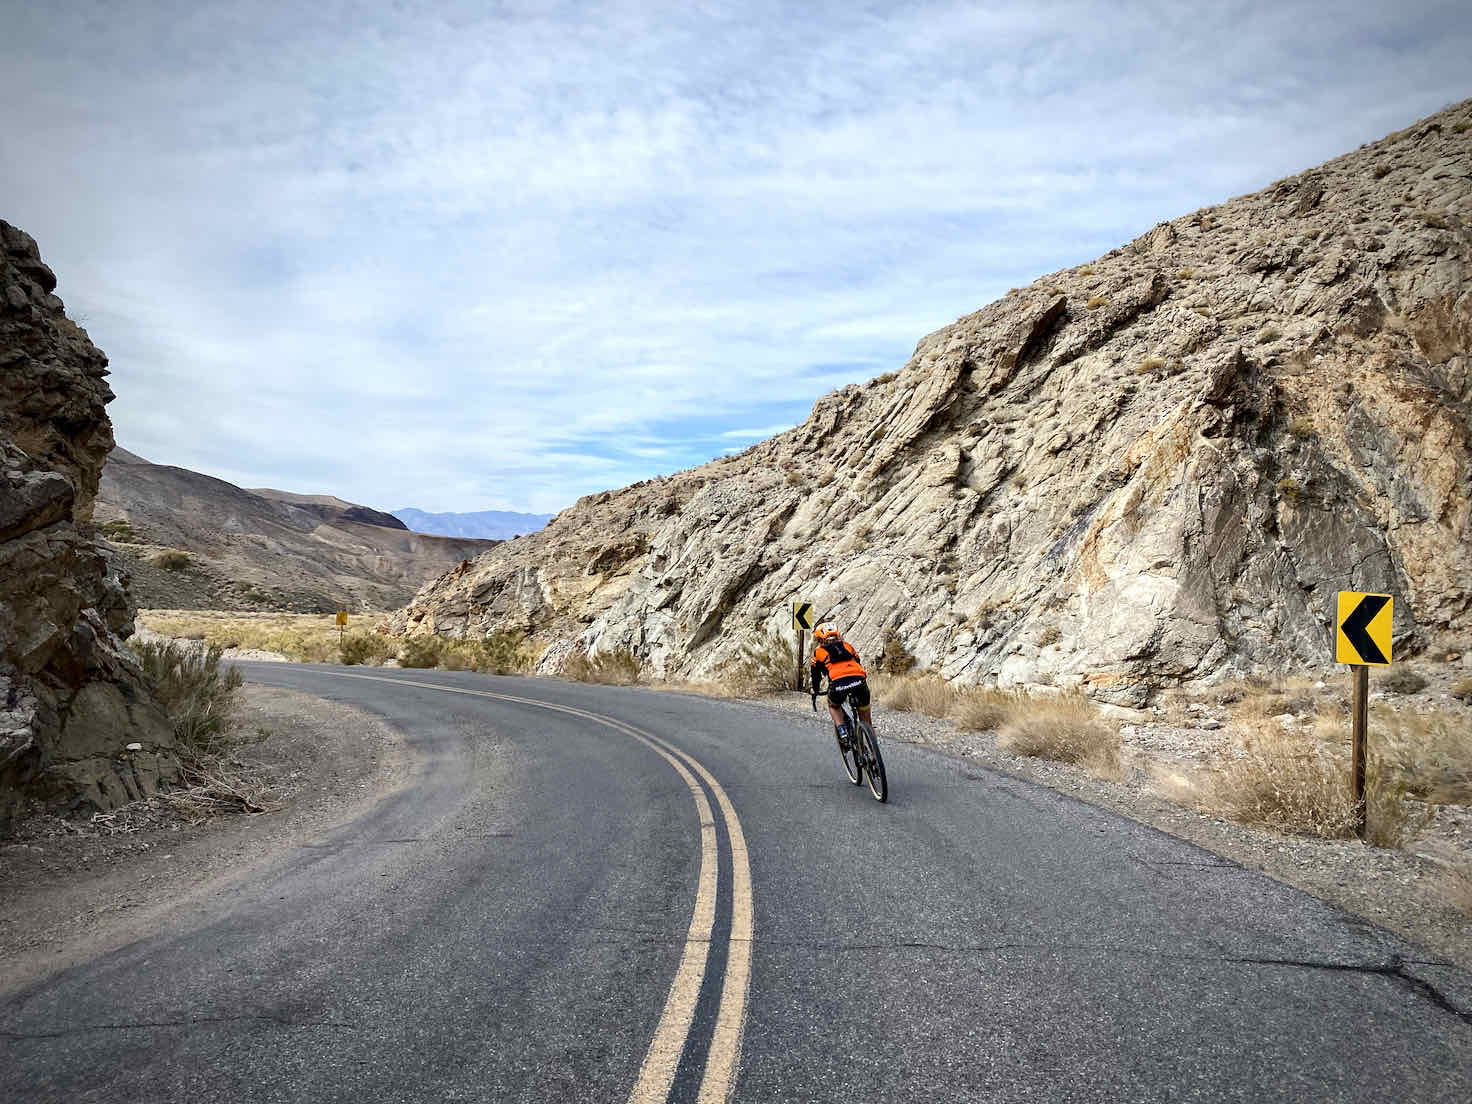 Cyclist making fast bending left hand turn on paved road in Death Valley National Park.